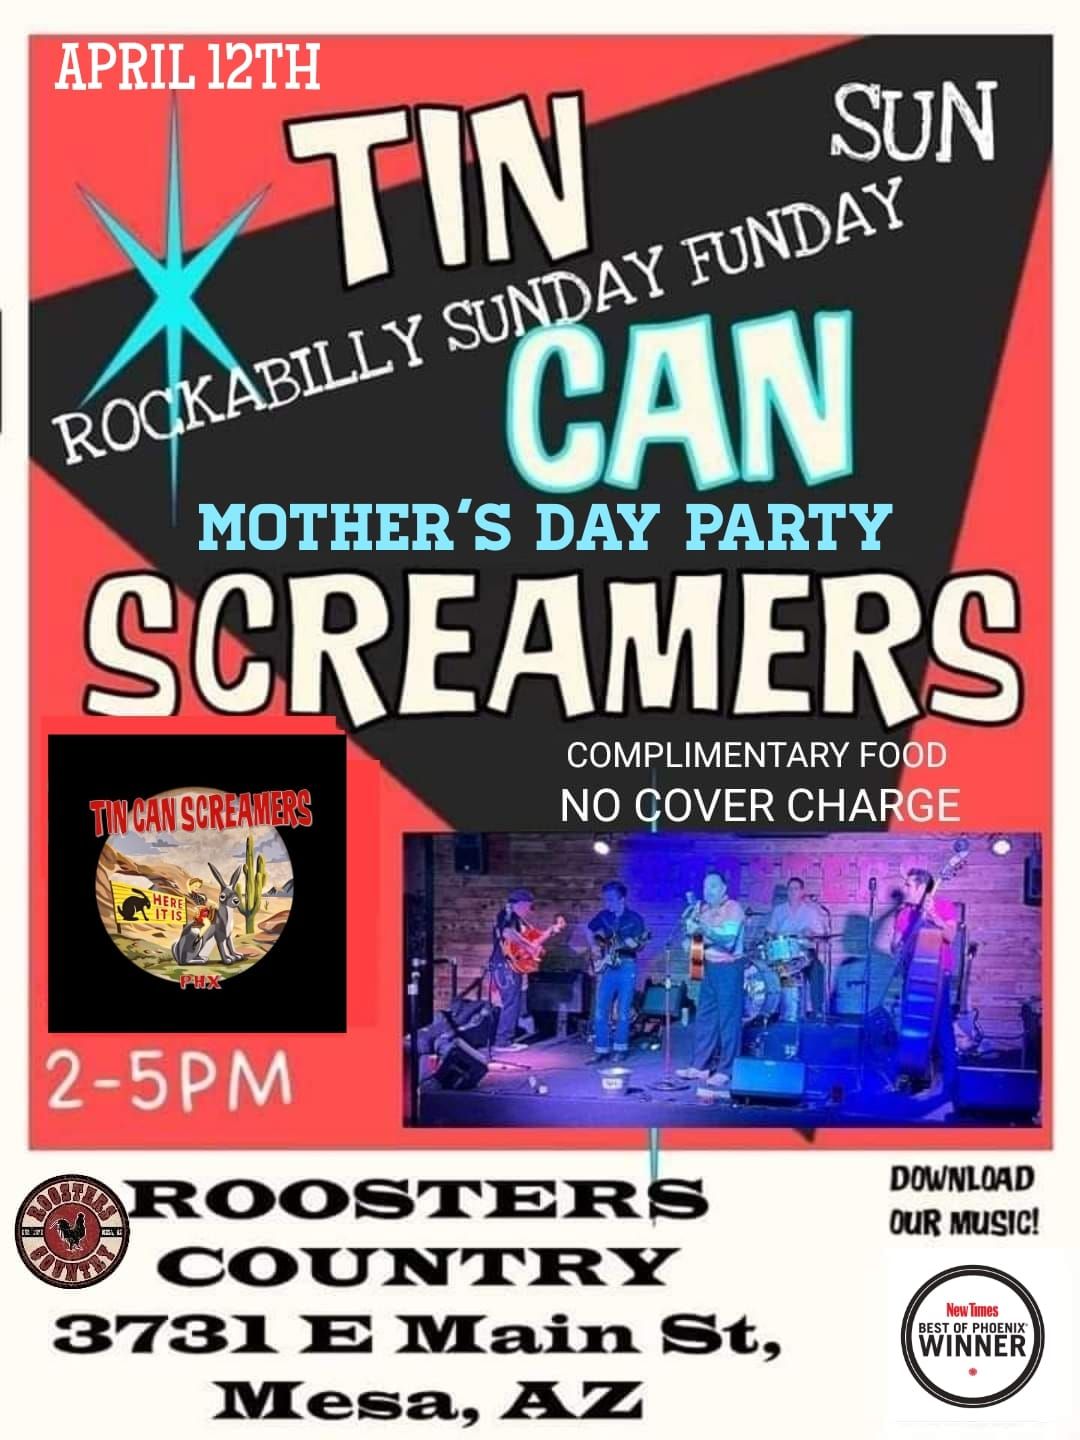 MOTHERS DAY ROCKABILLY SUN WITH THE TIN CAN SCREAMERS 